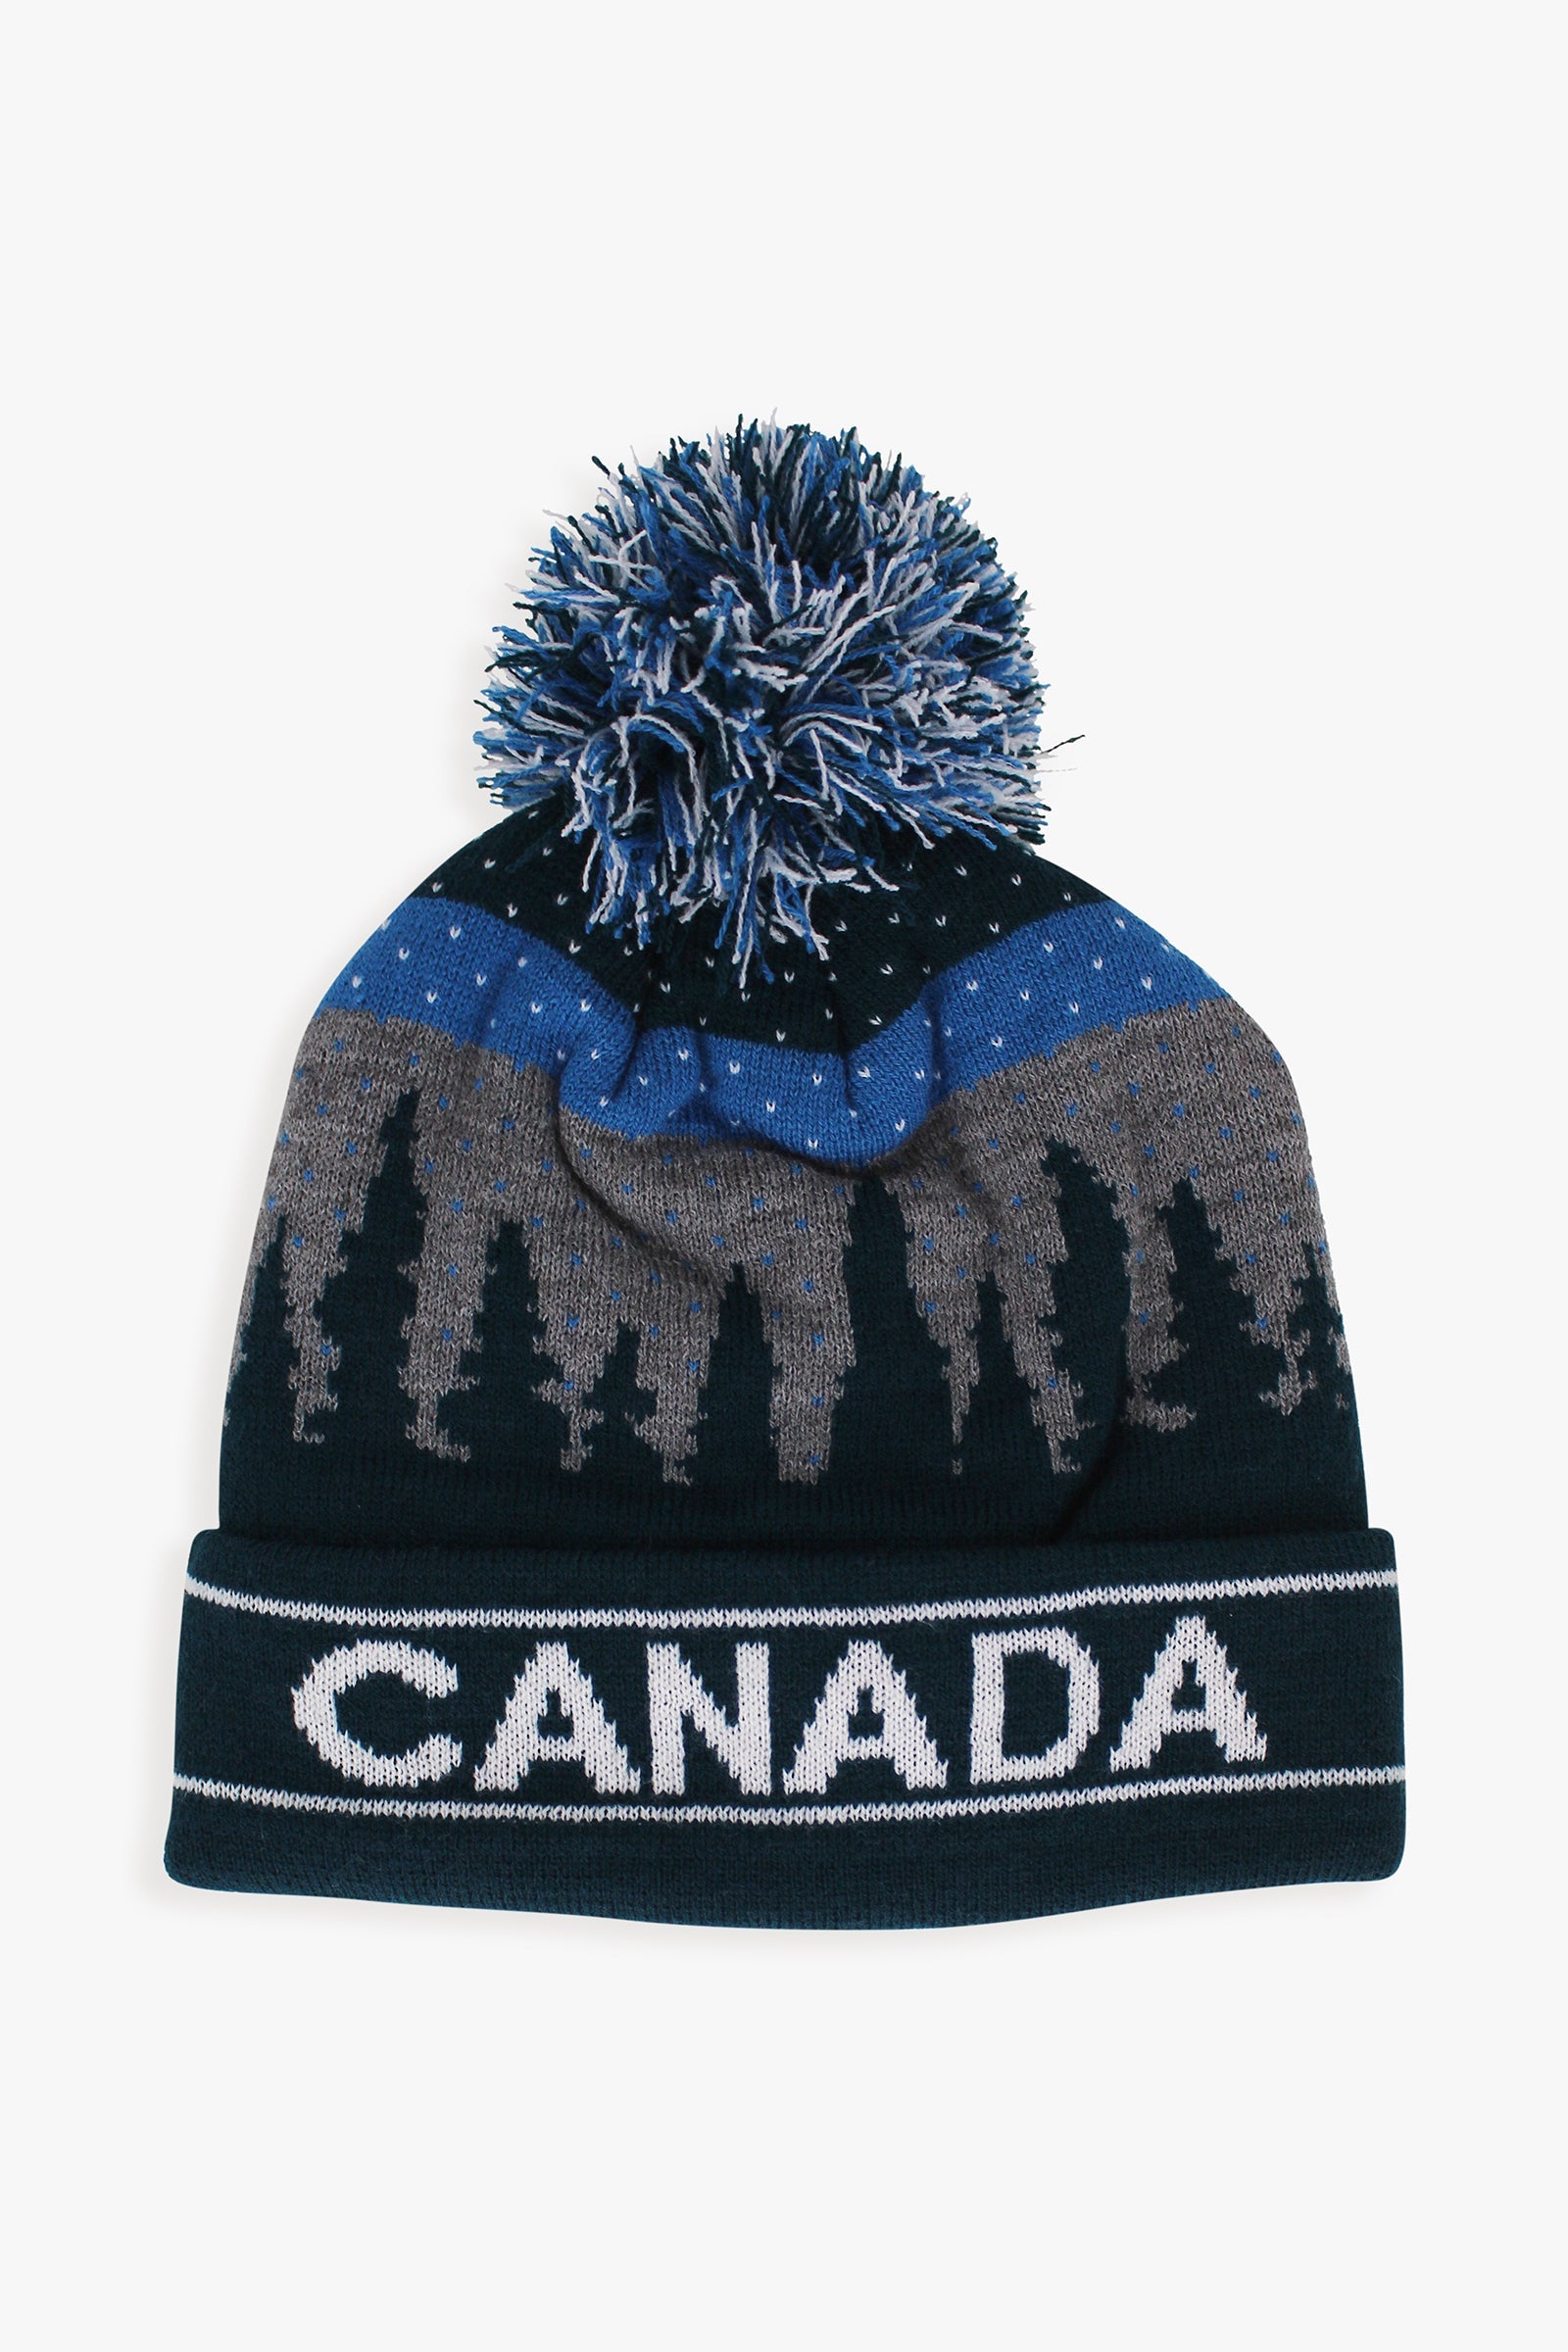 Canada Adult Fleece Lined Hat With Scenic Landscape